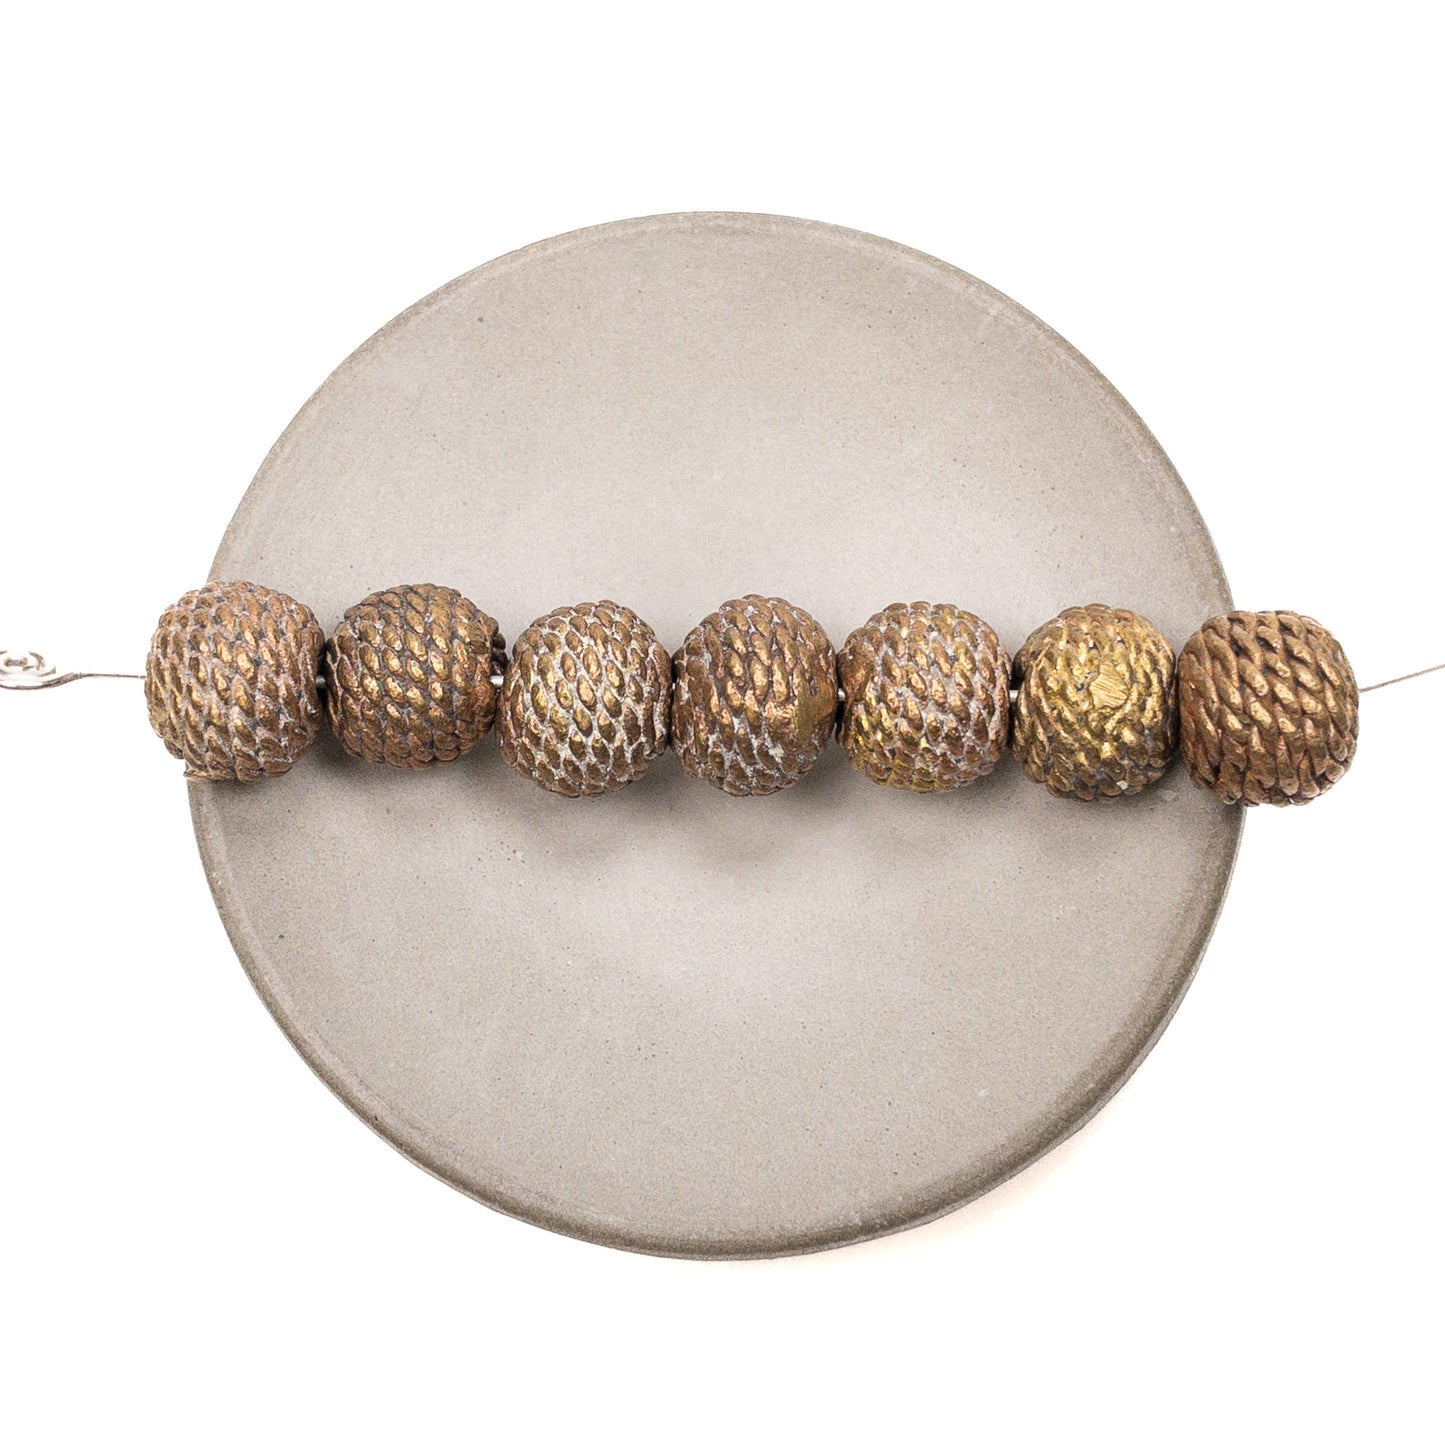 Rustic African Brass Bead Mix (5 Options Available) - 7 pcs.